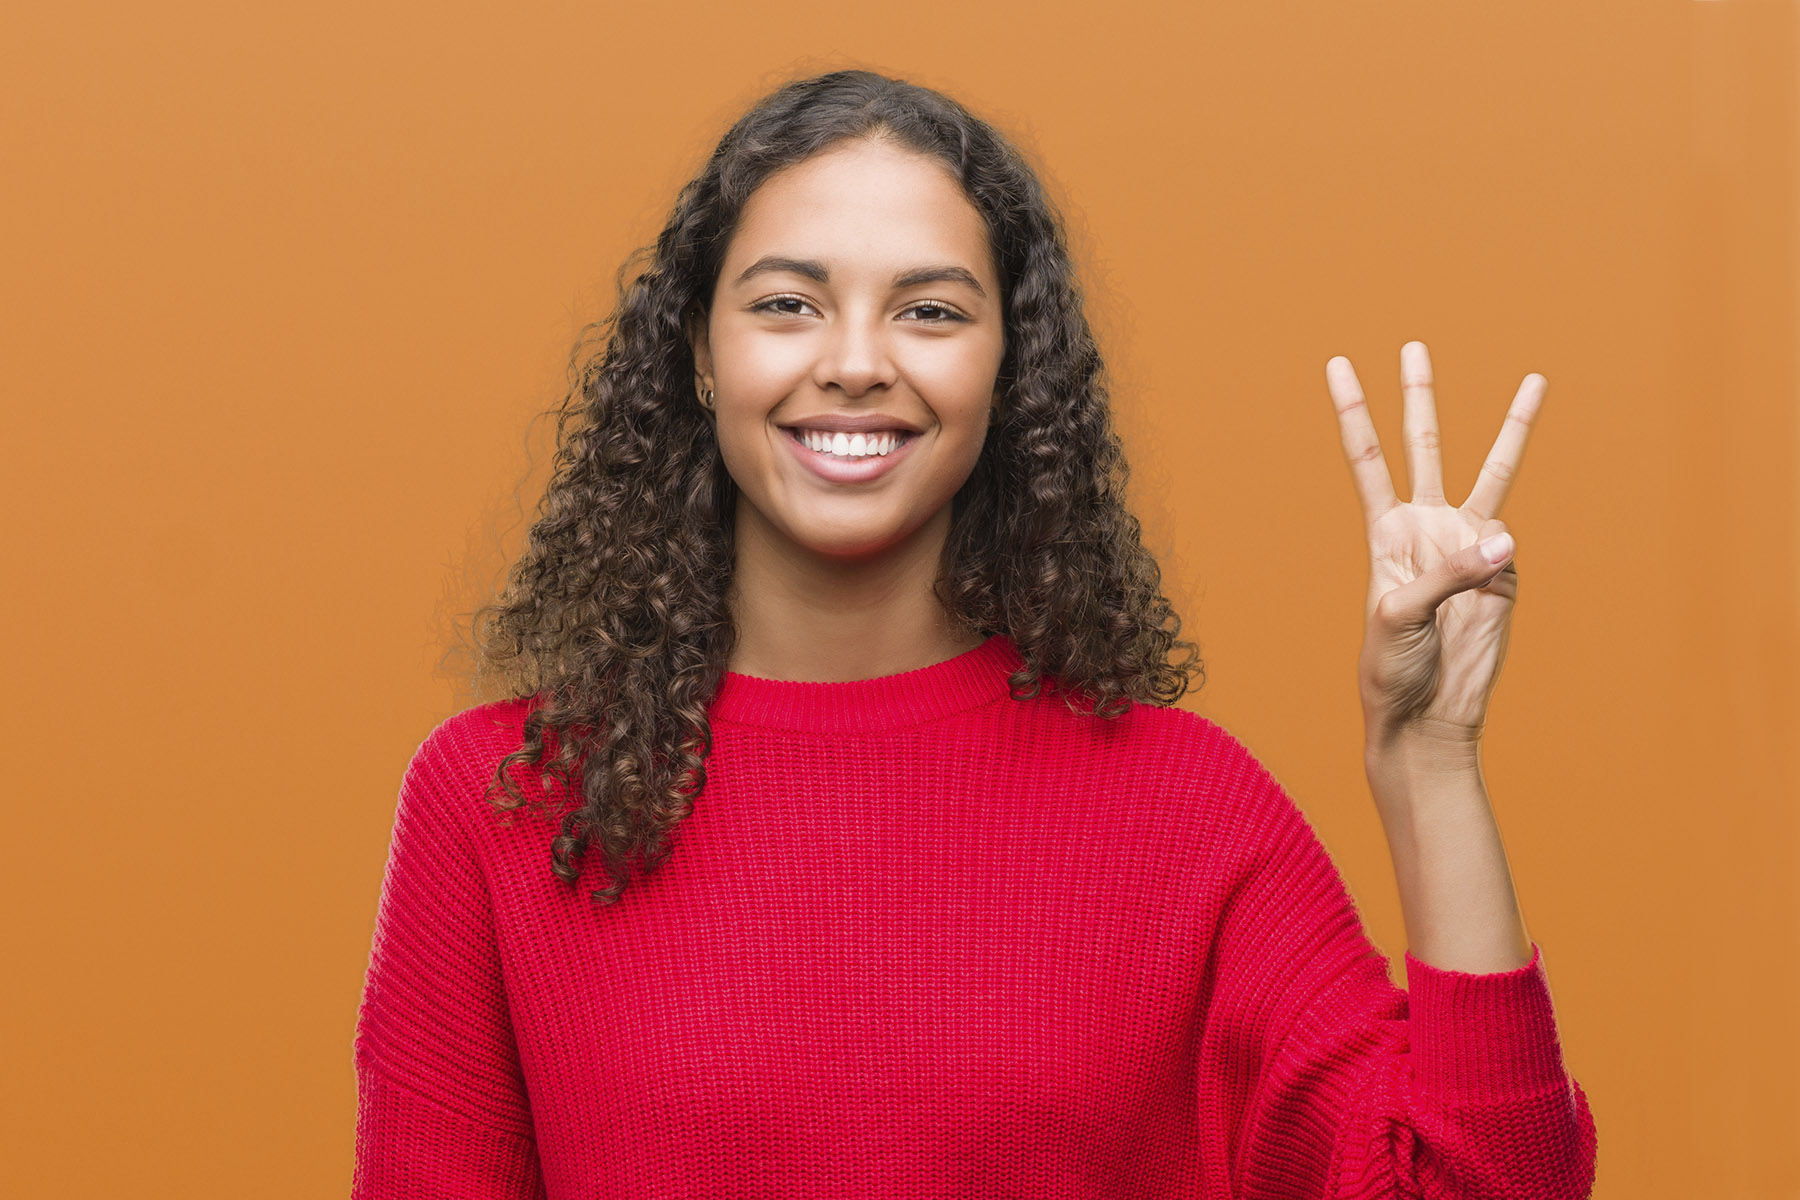 Woman holding up 3 fingers